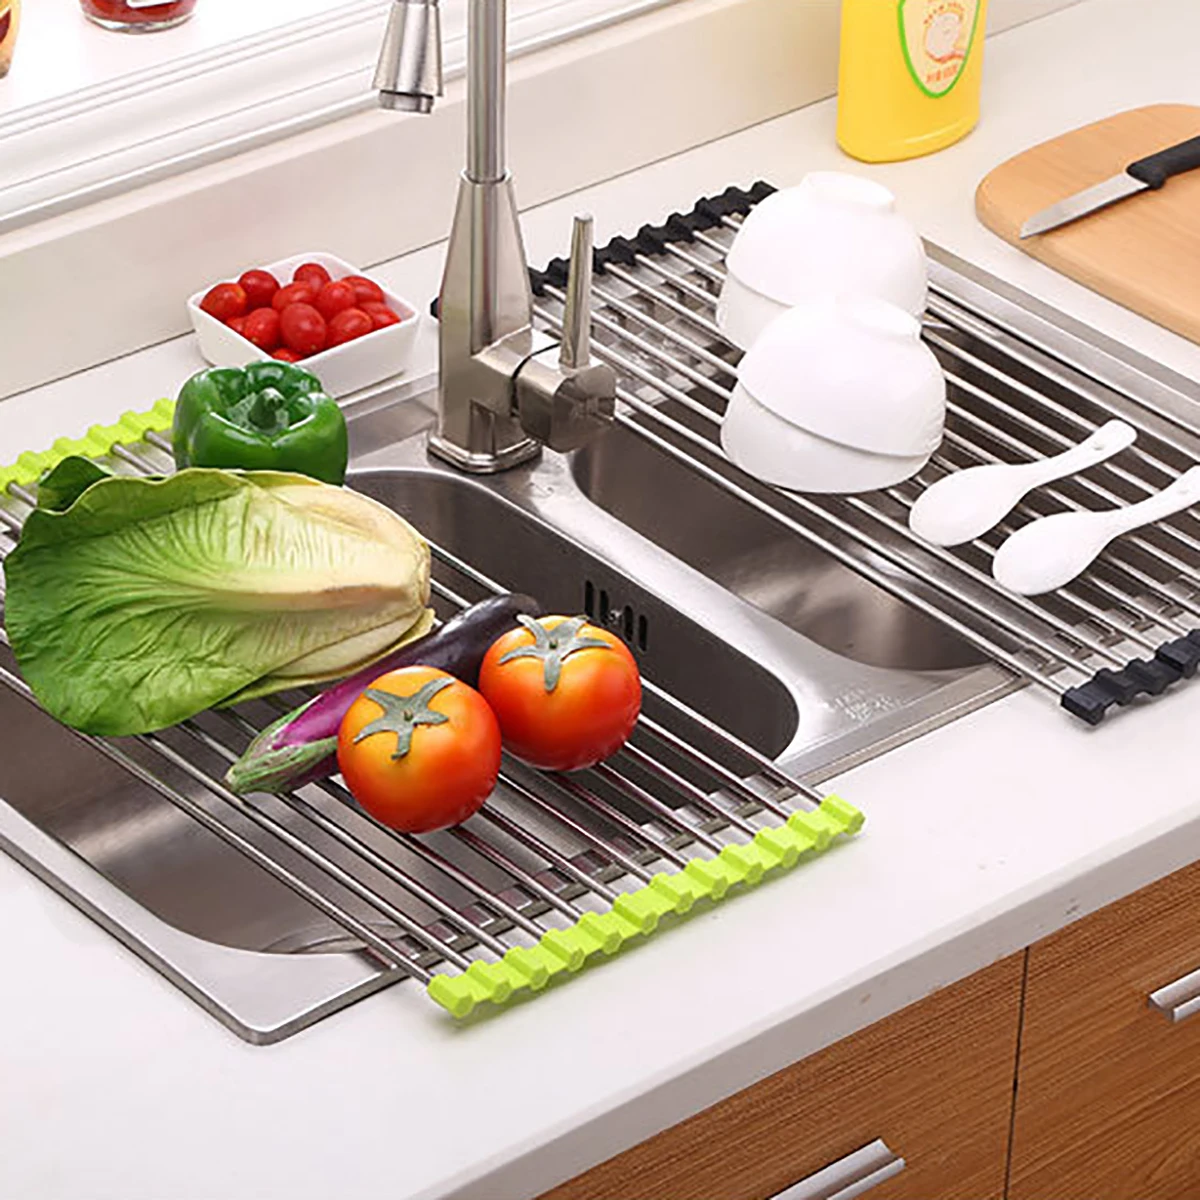 New-Stainless-Steel-Foldable-Sink-Drain-Rack-Useful-Things-For-Kitchen ...